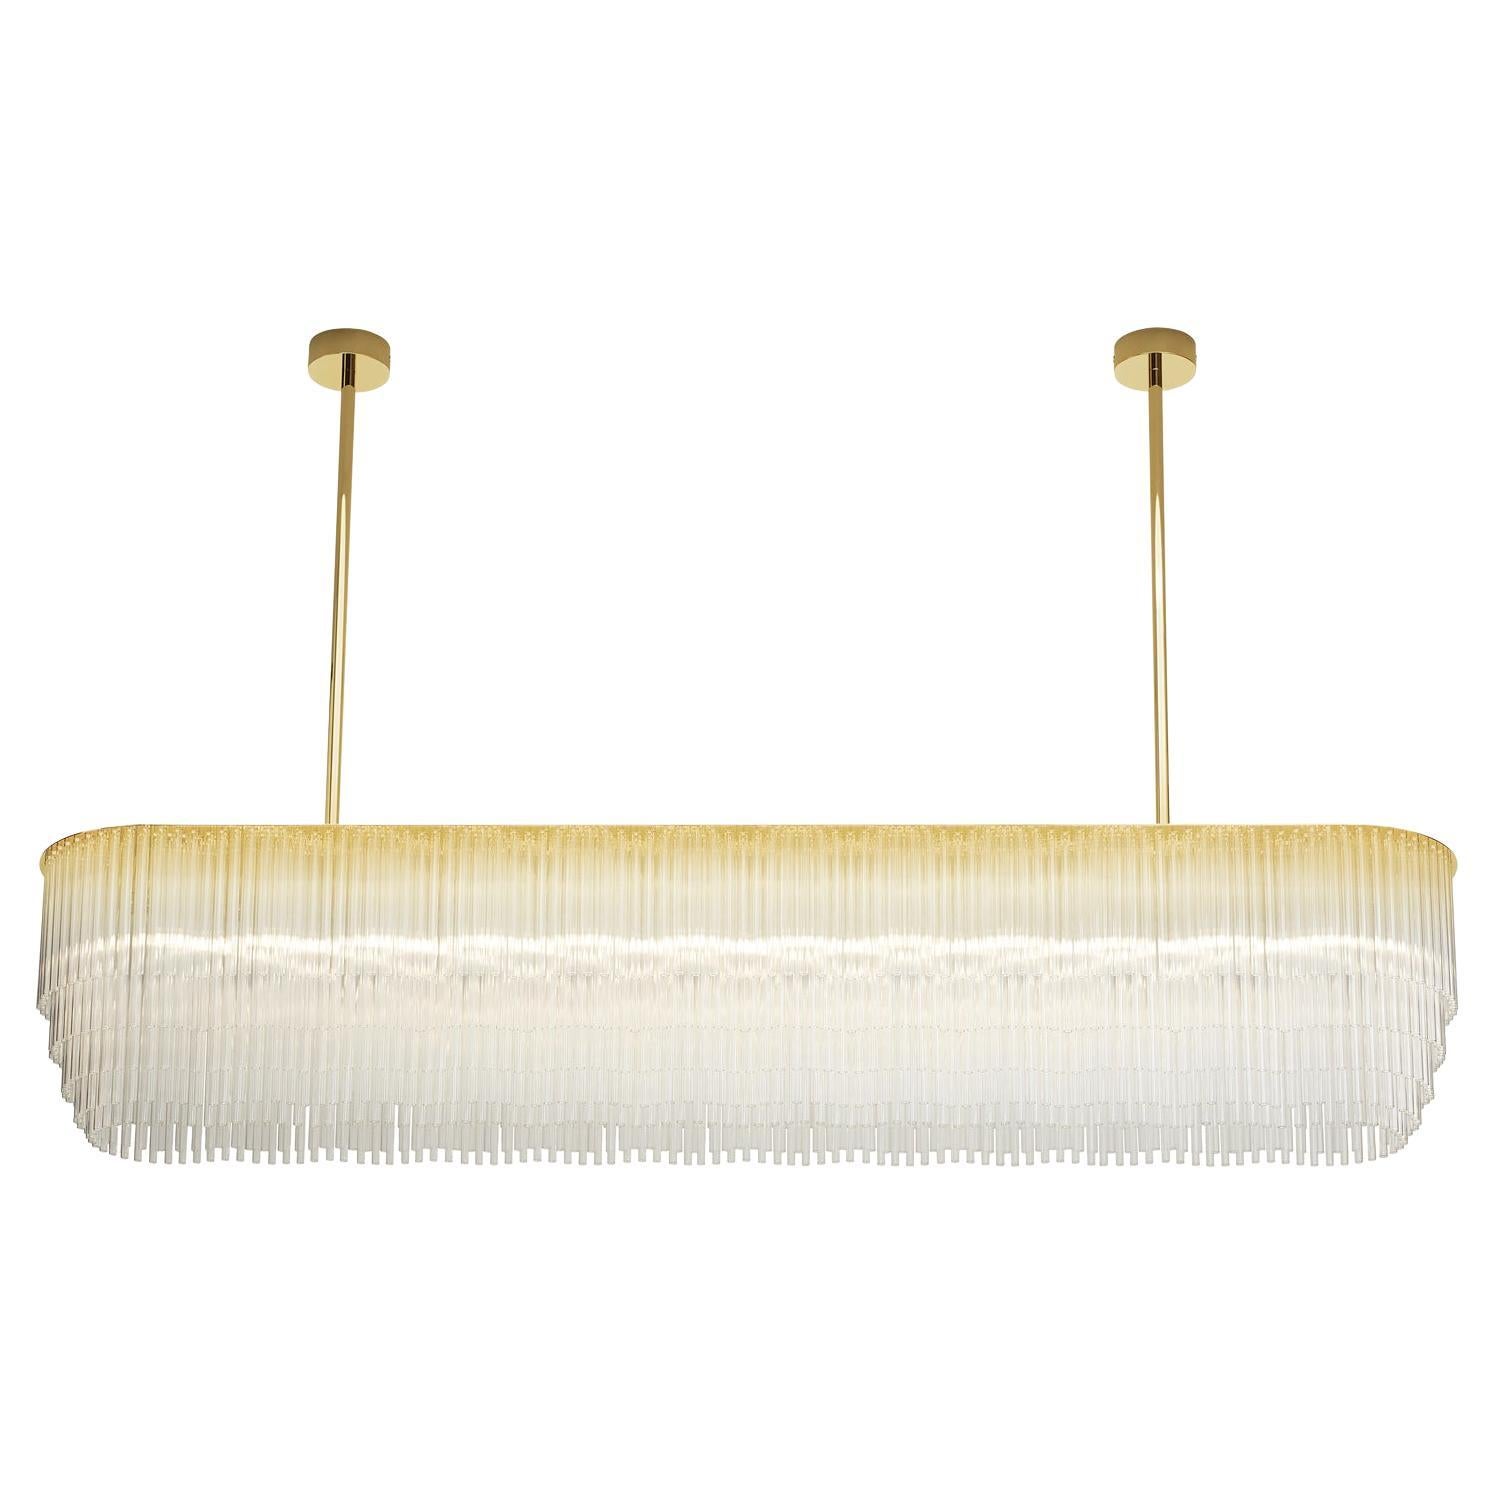 Linear Chandelier 1806mm / 71" in Polished Brass with Tiered Glass Profile For Sale